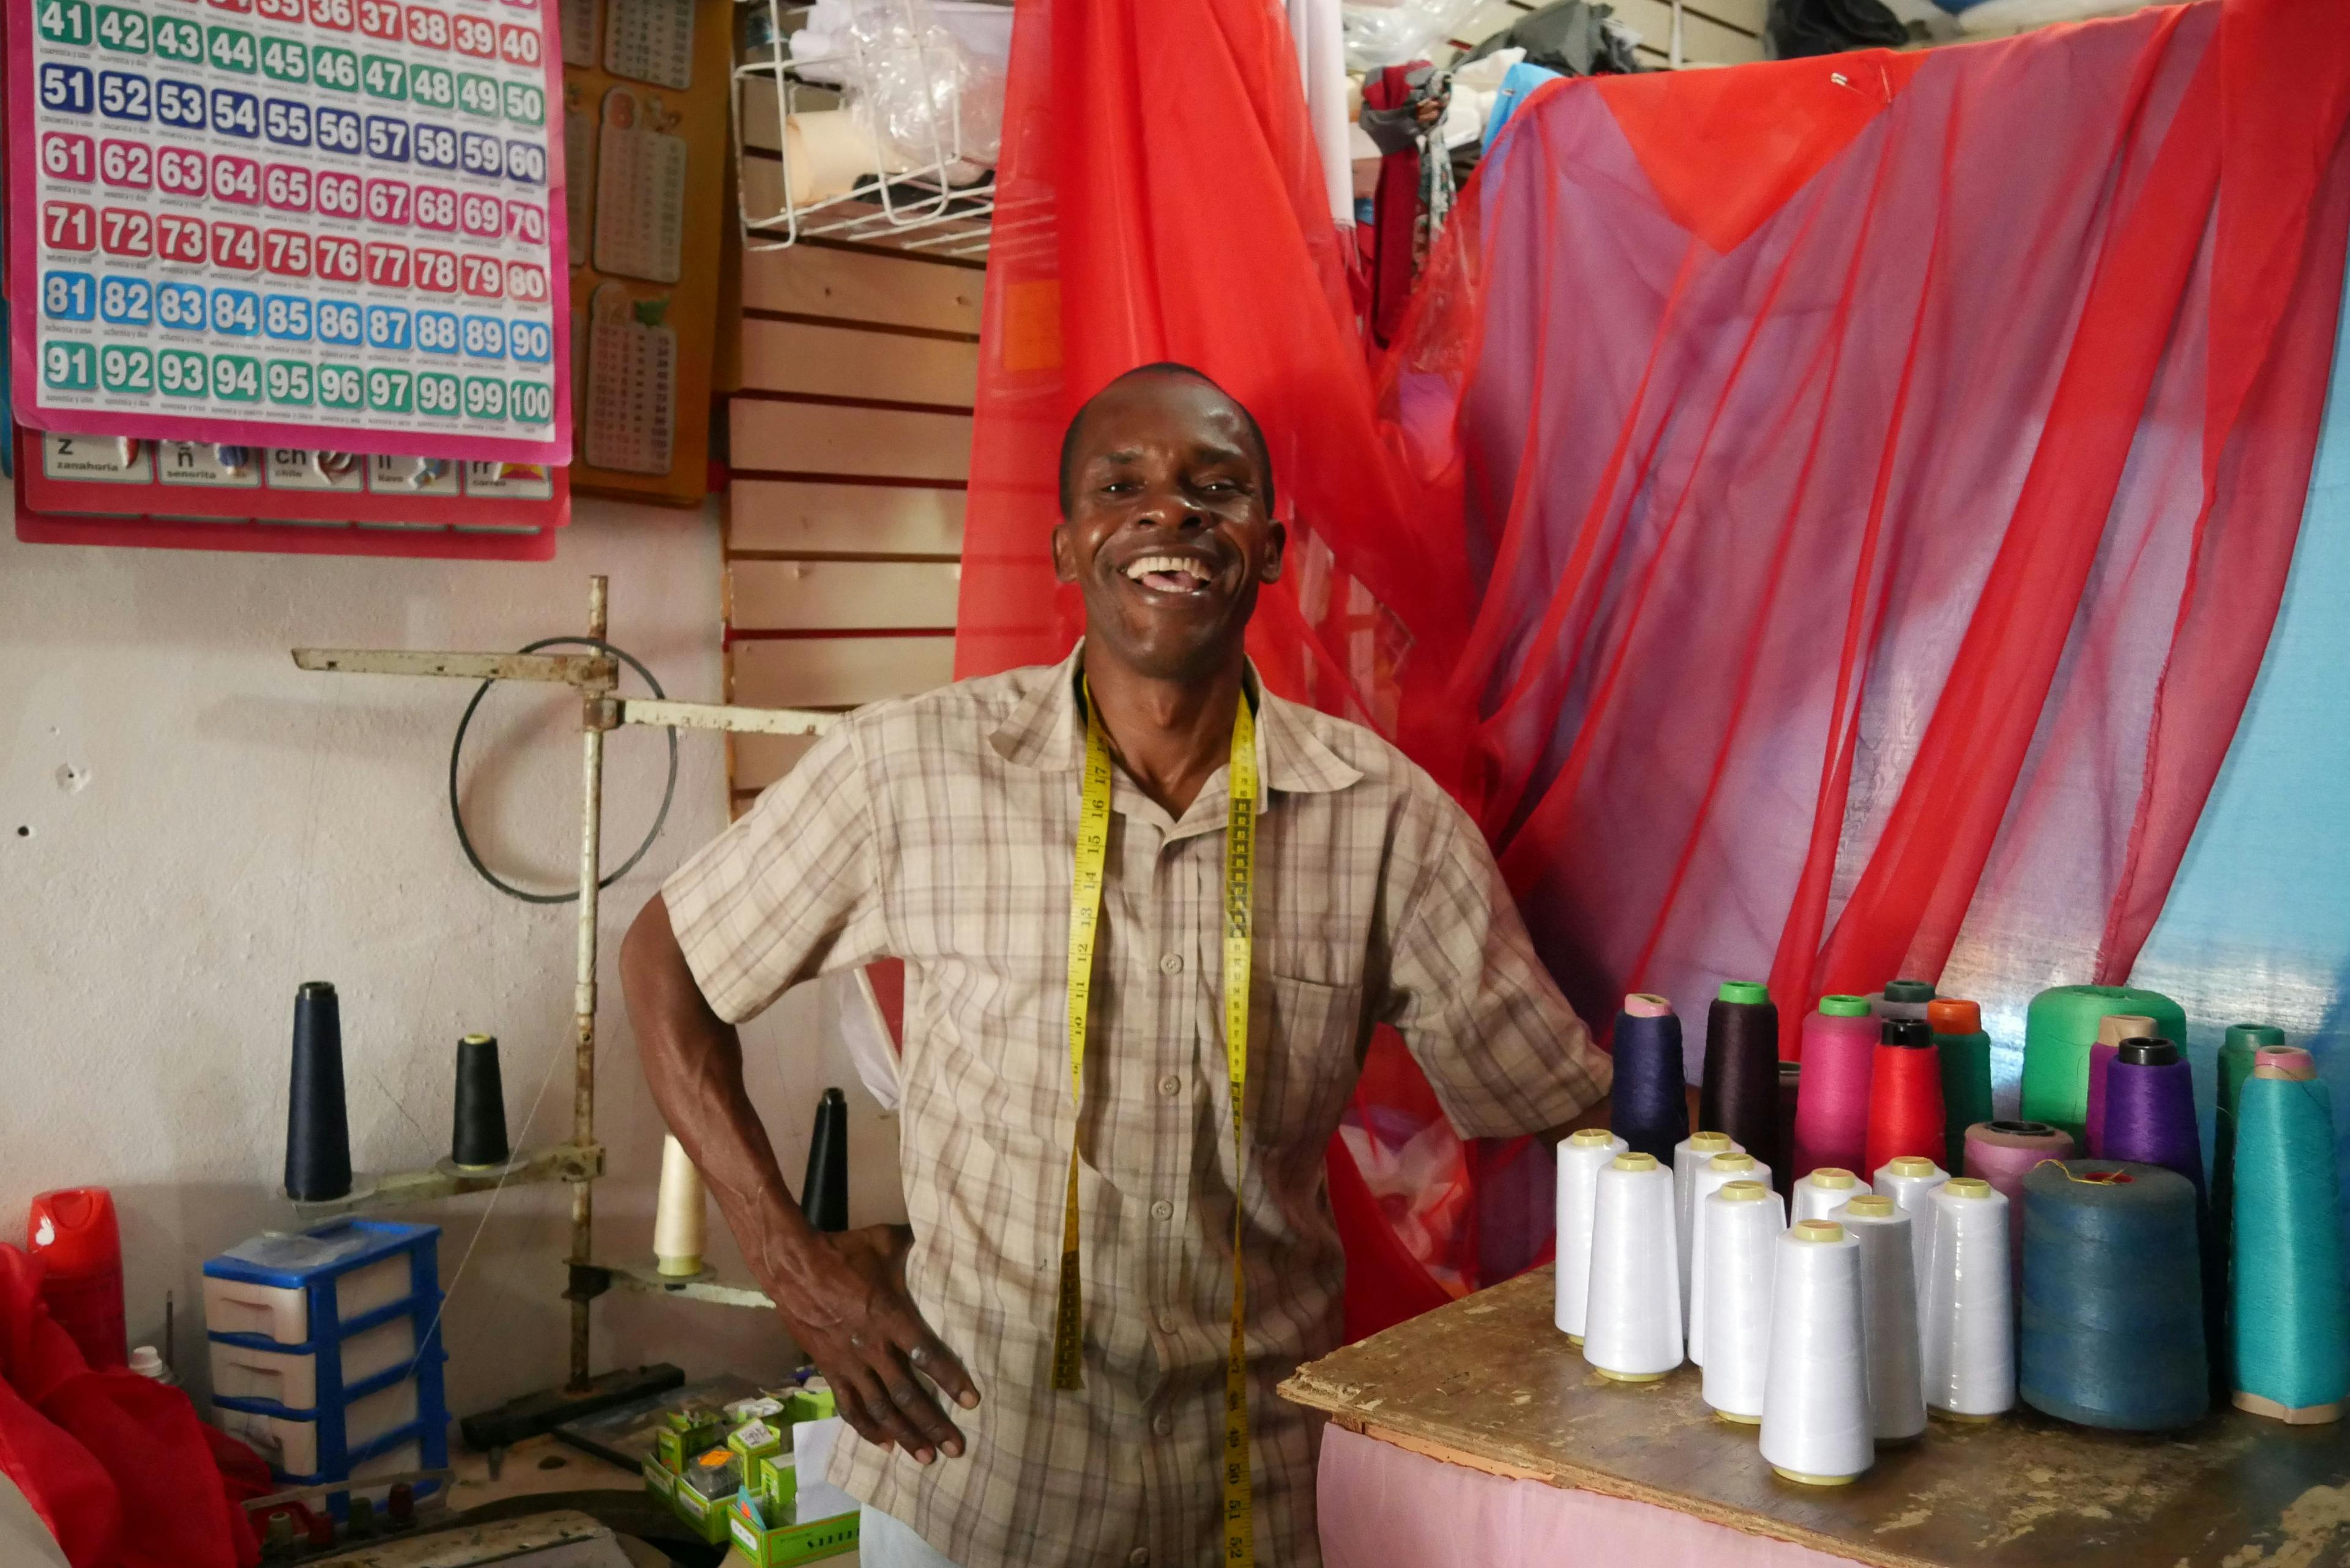 Business owner helped with microfinance in Dominican Republic